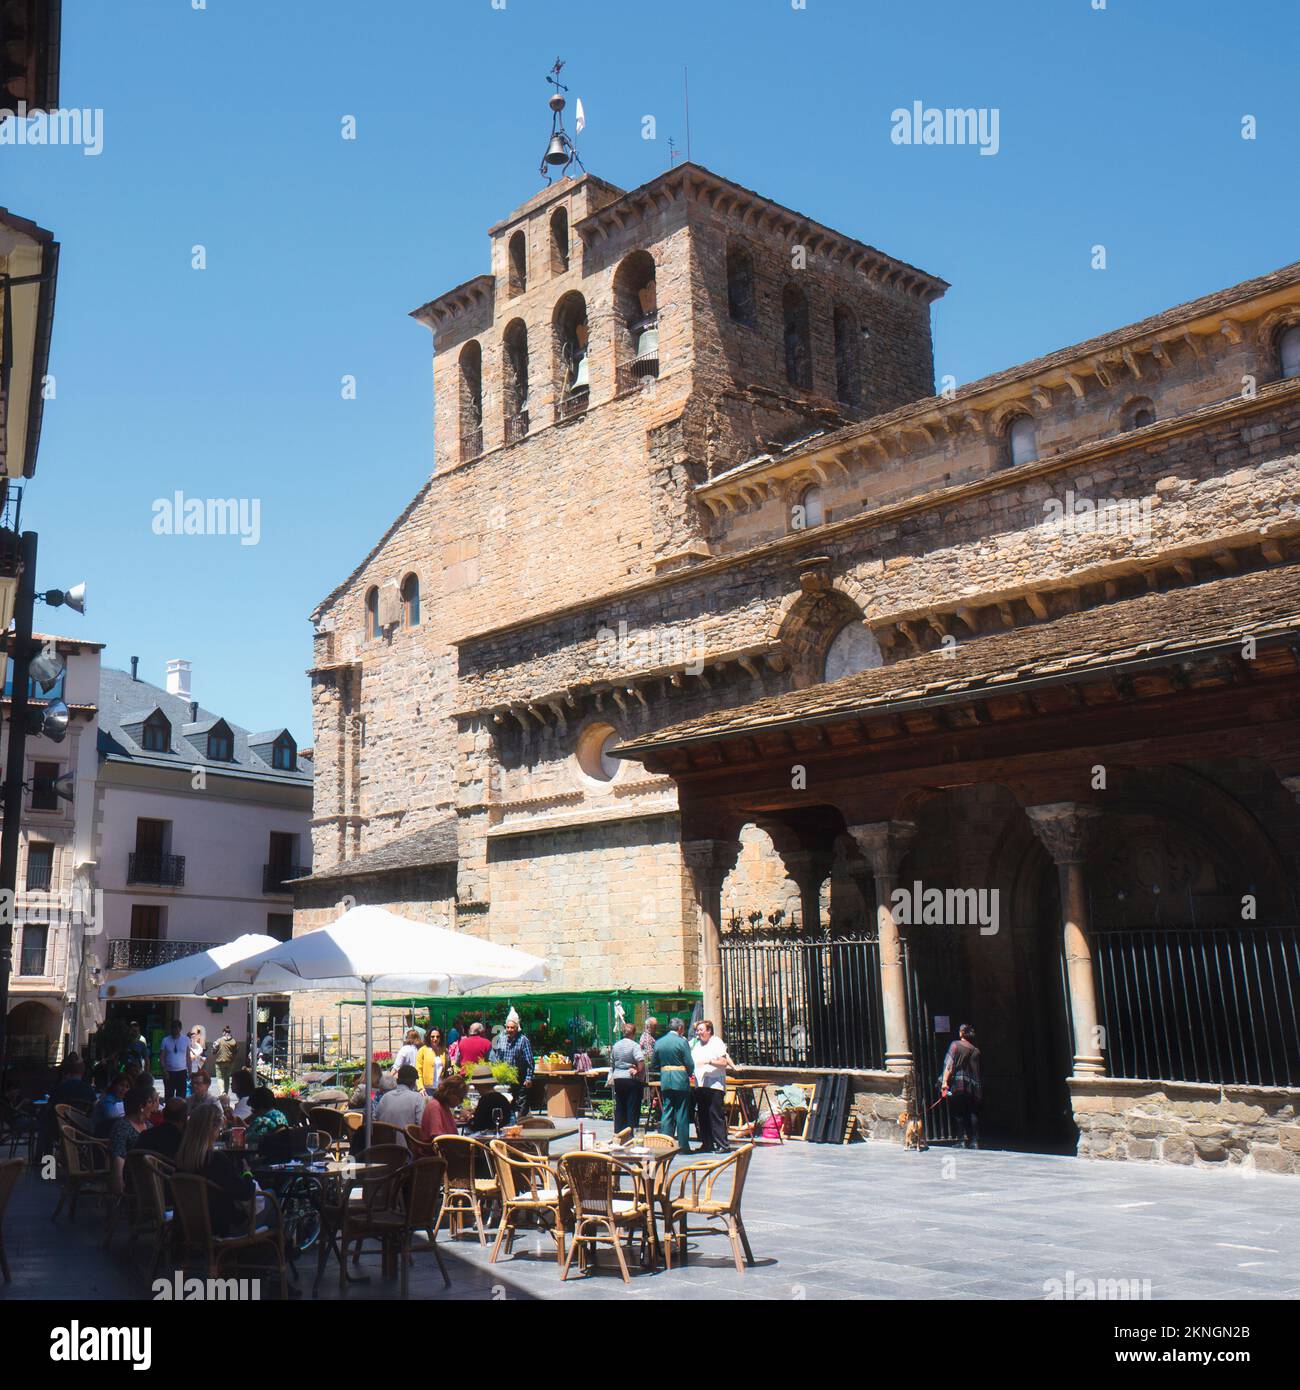 Jaca, Huesca Province, Aragon, Spain. Romanesque Catedral de San Pedro Apóstol.  Cathedral of St Peter the Apostle. Stock Photo